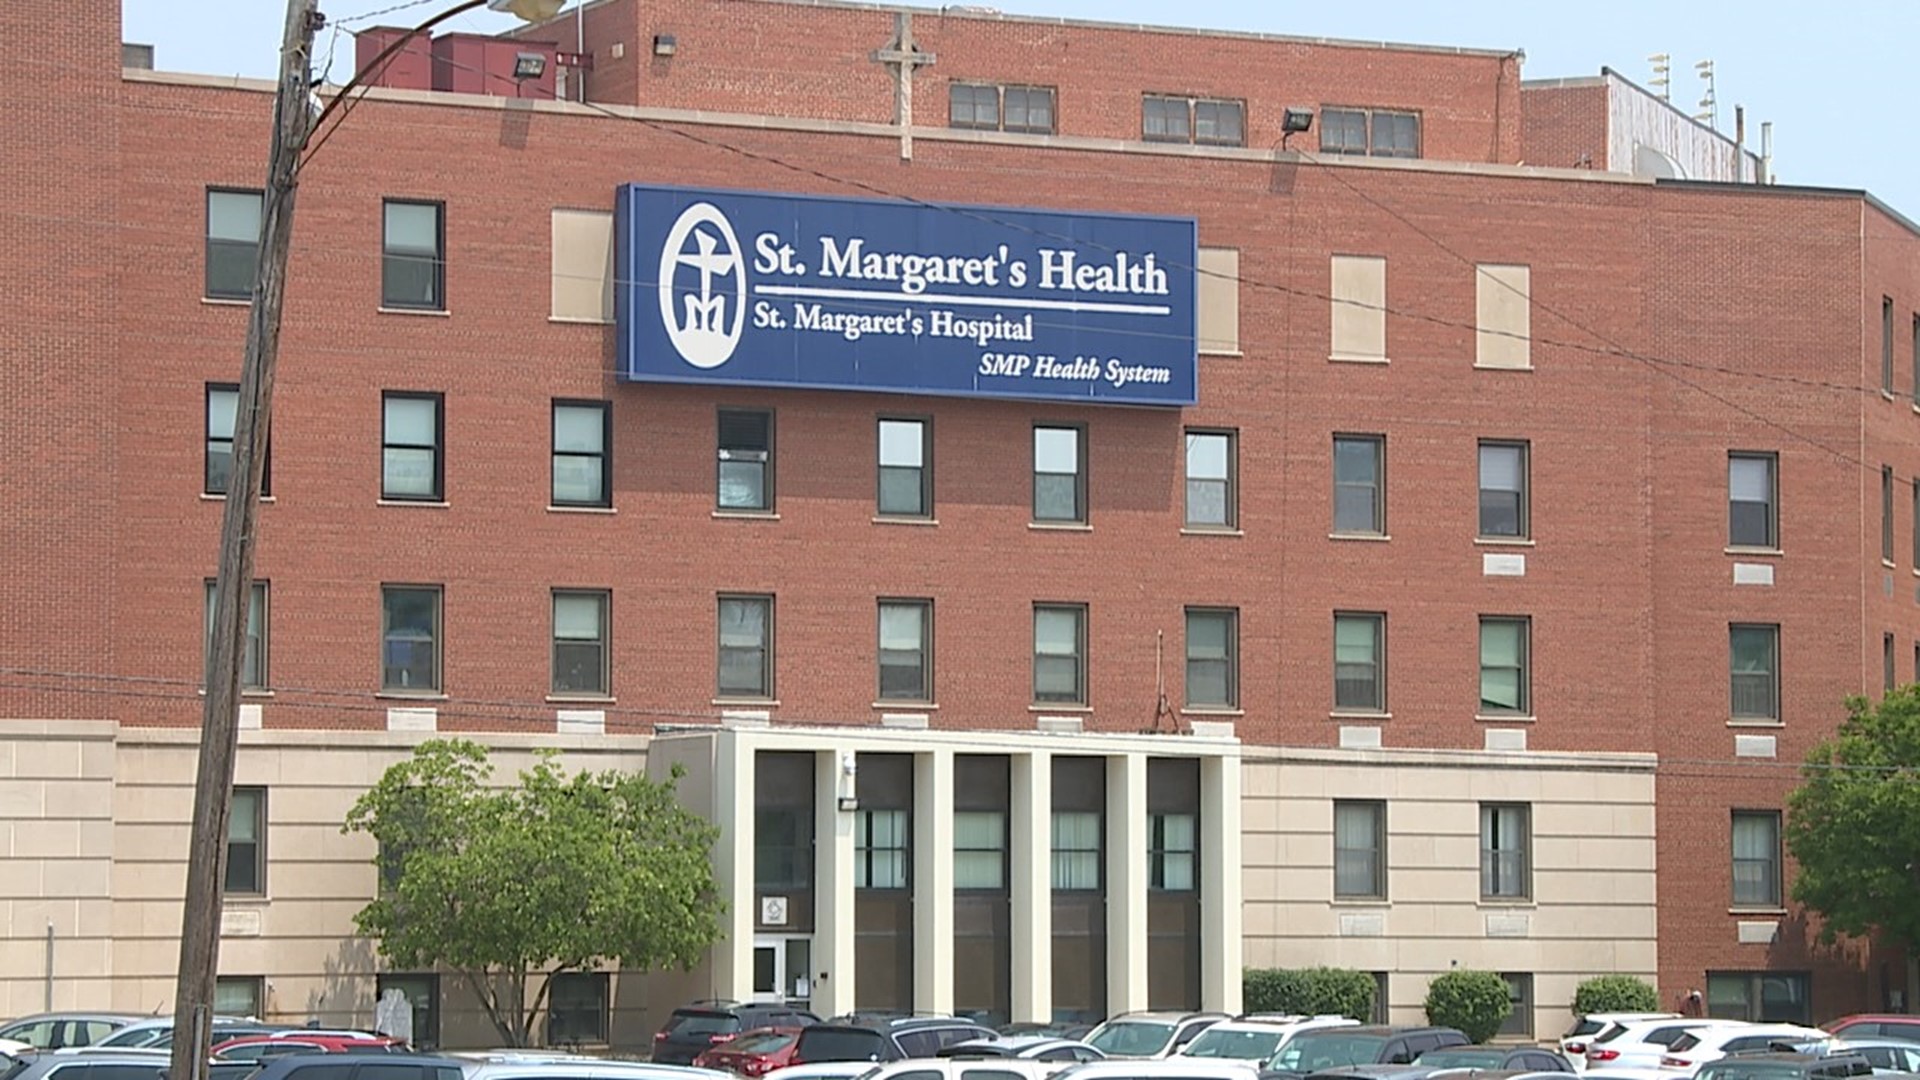 St. Margaret's Health will close all facilities at its Spring Valley and Peru locations at 11:59 p.m. on Friday, June 16.